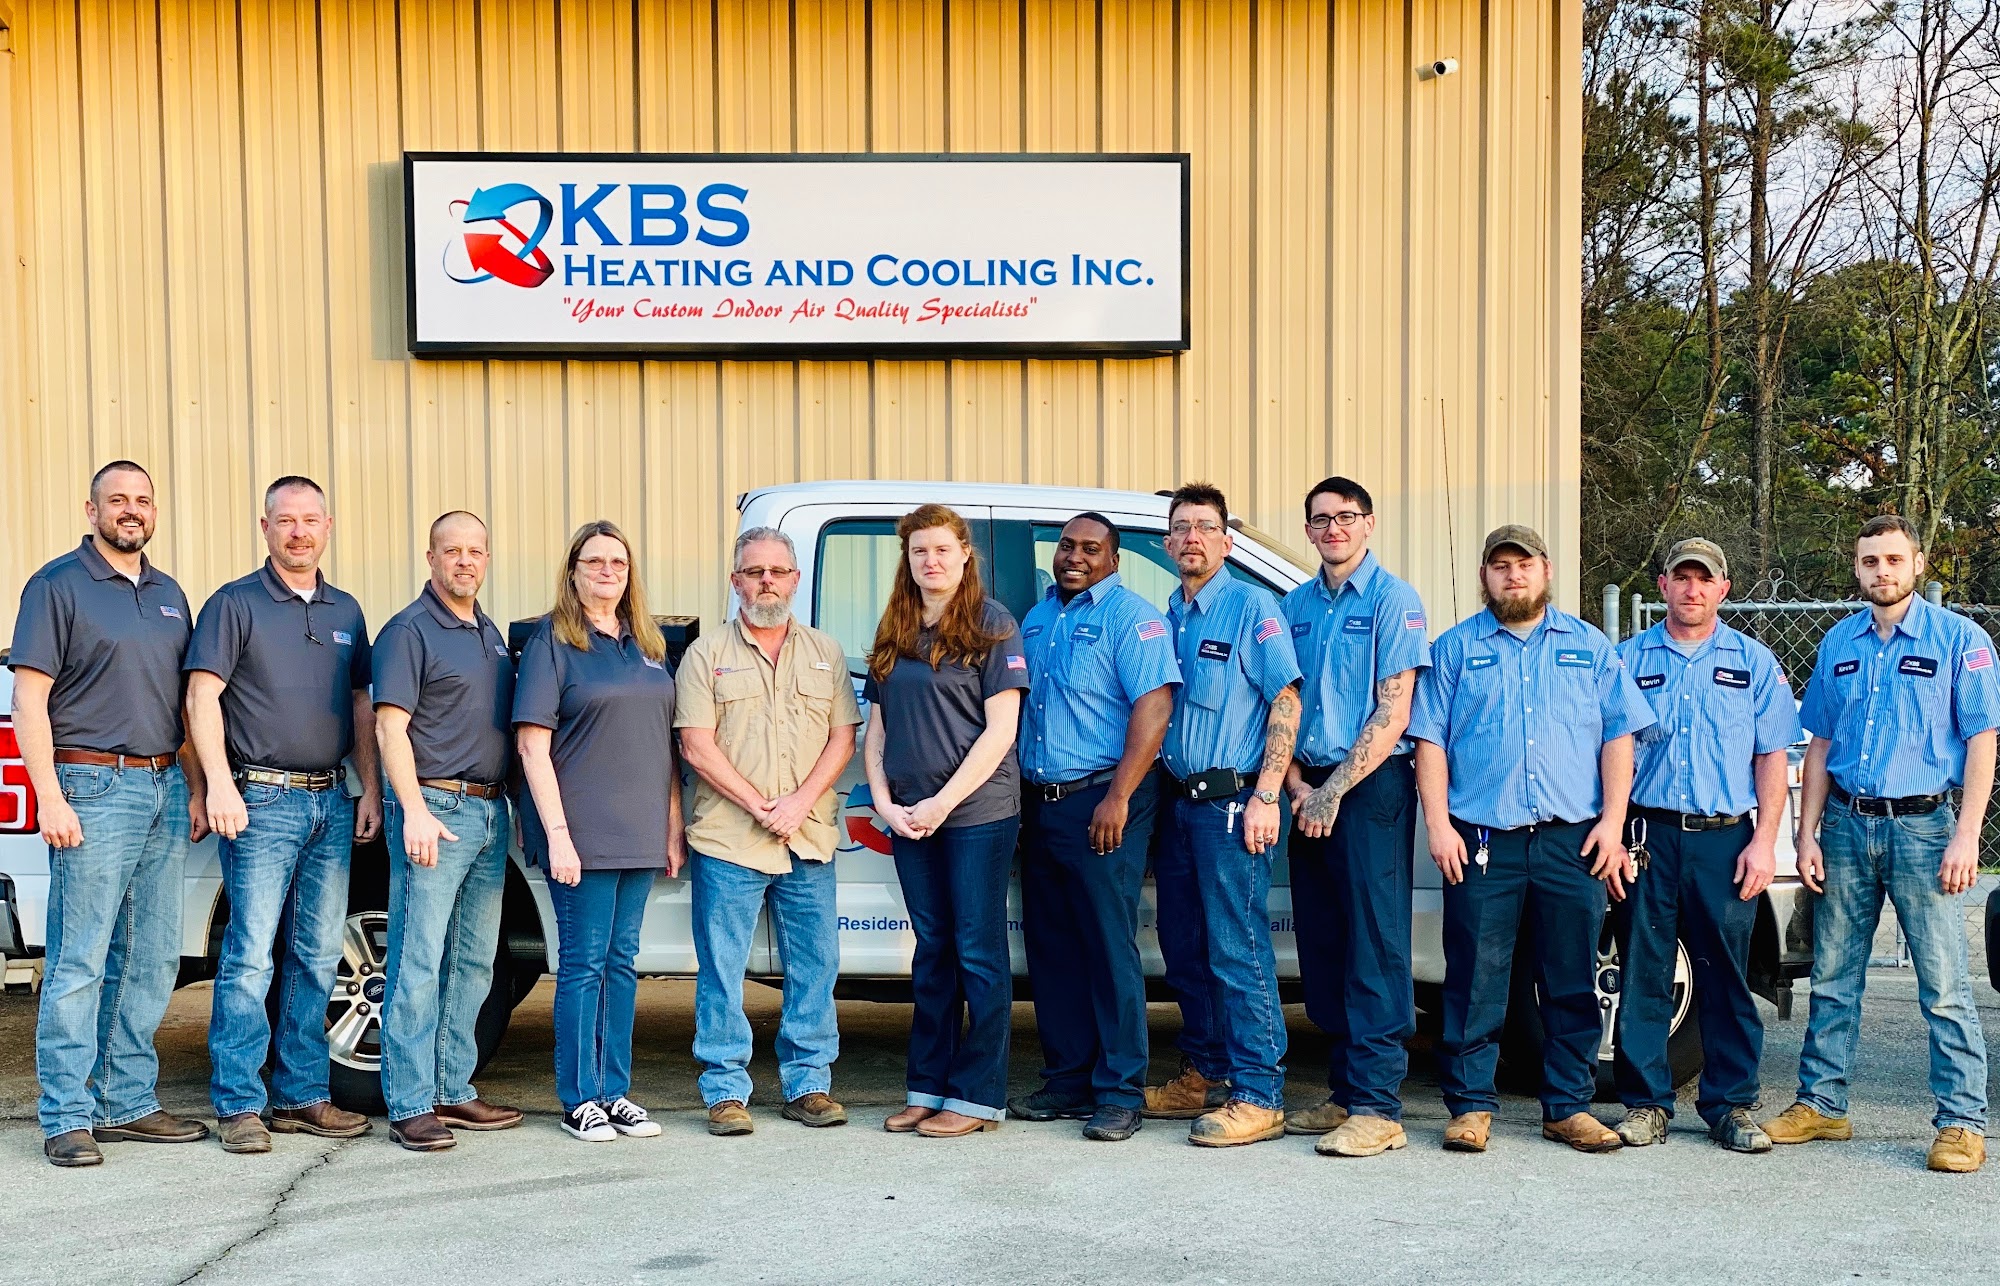 KBS Heating & Cooling Inc